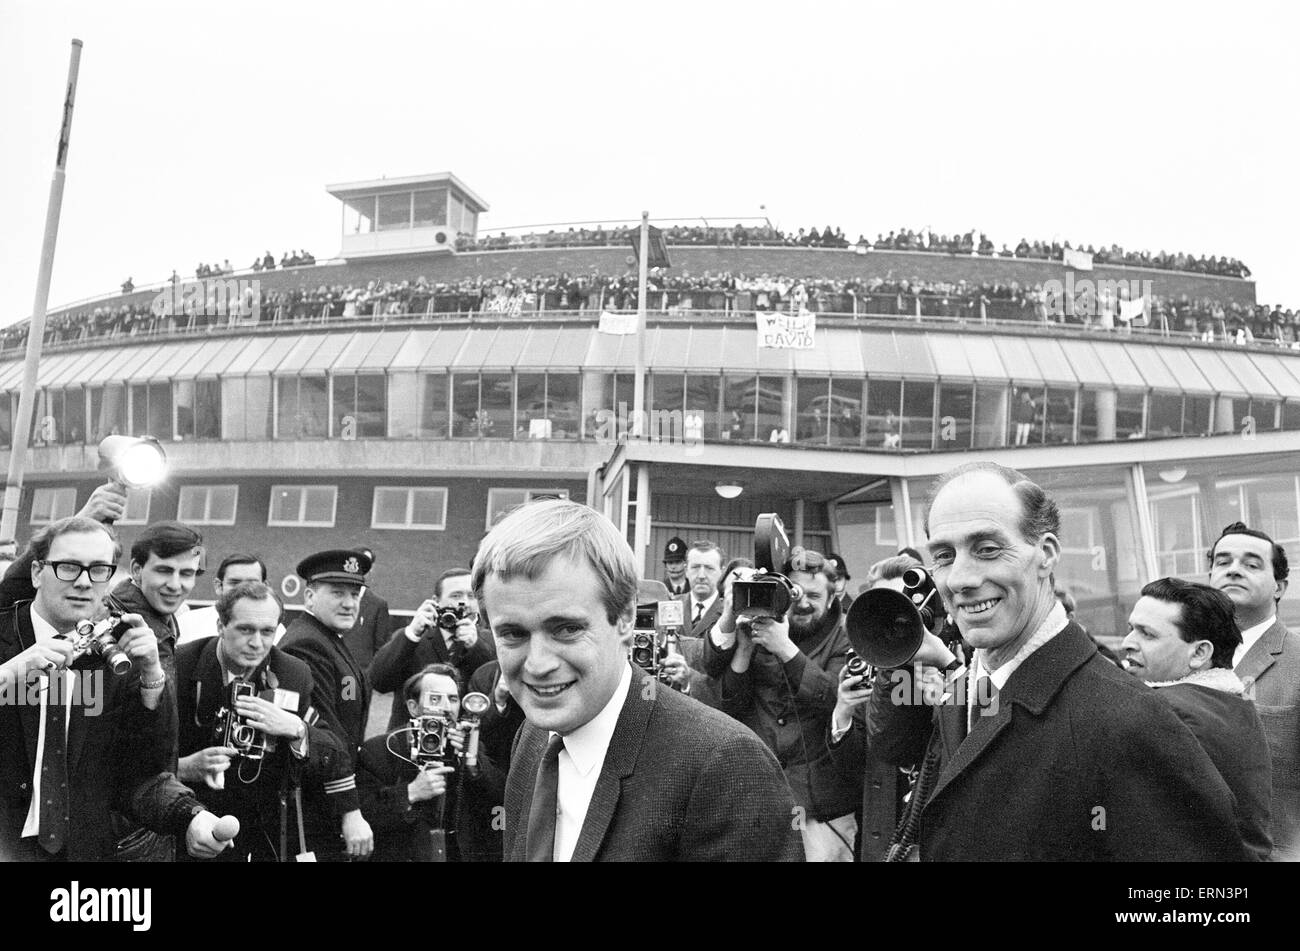 David McCallum, actor who plays the role of secret agent Illya Kuryakin in NBC show The Man from U.N.C.L.E., pictured arriving at London Heathrow Airport, 16th March 1966. UK Promotion Tour. Stock Photo